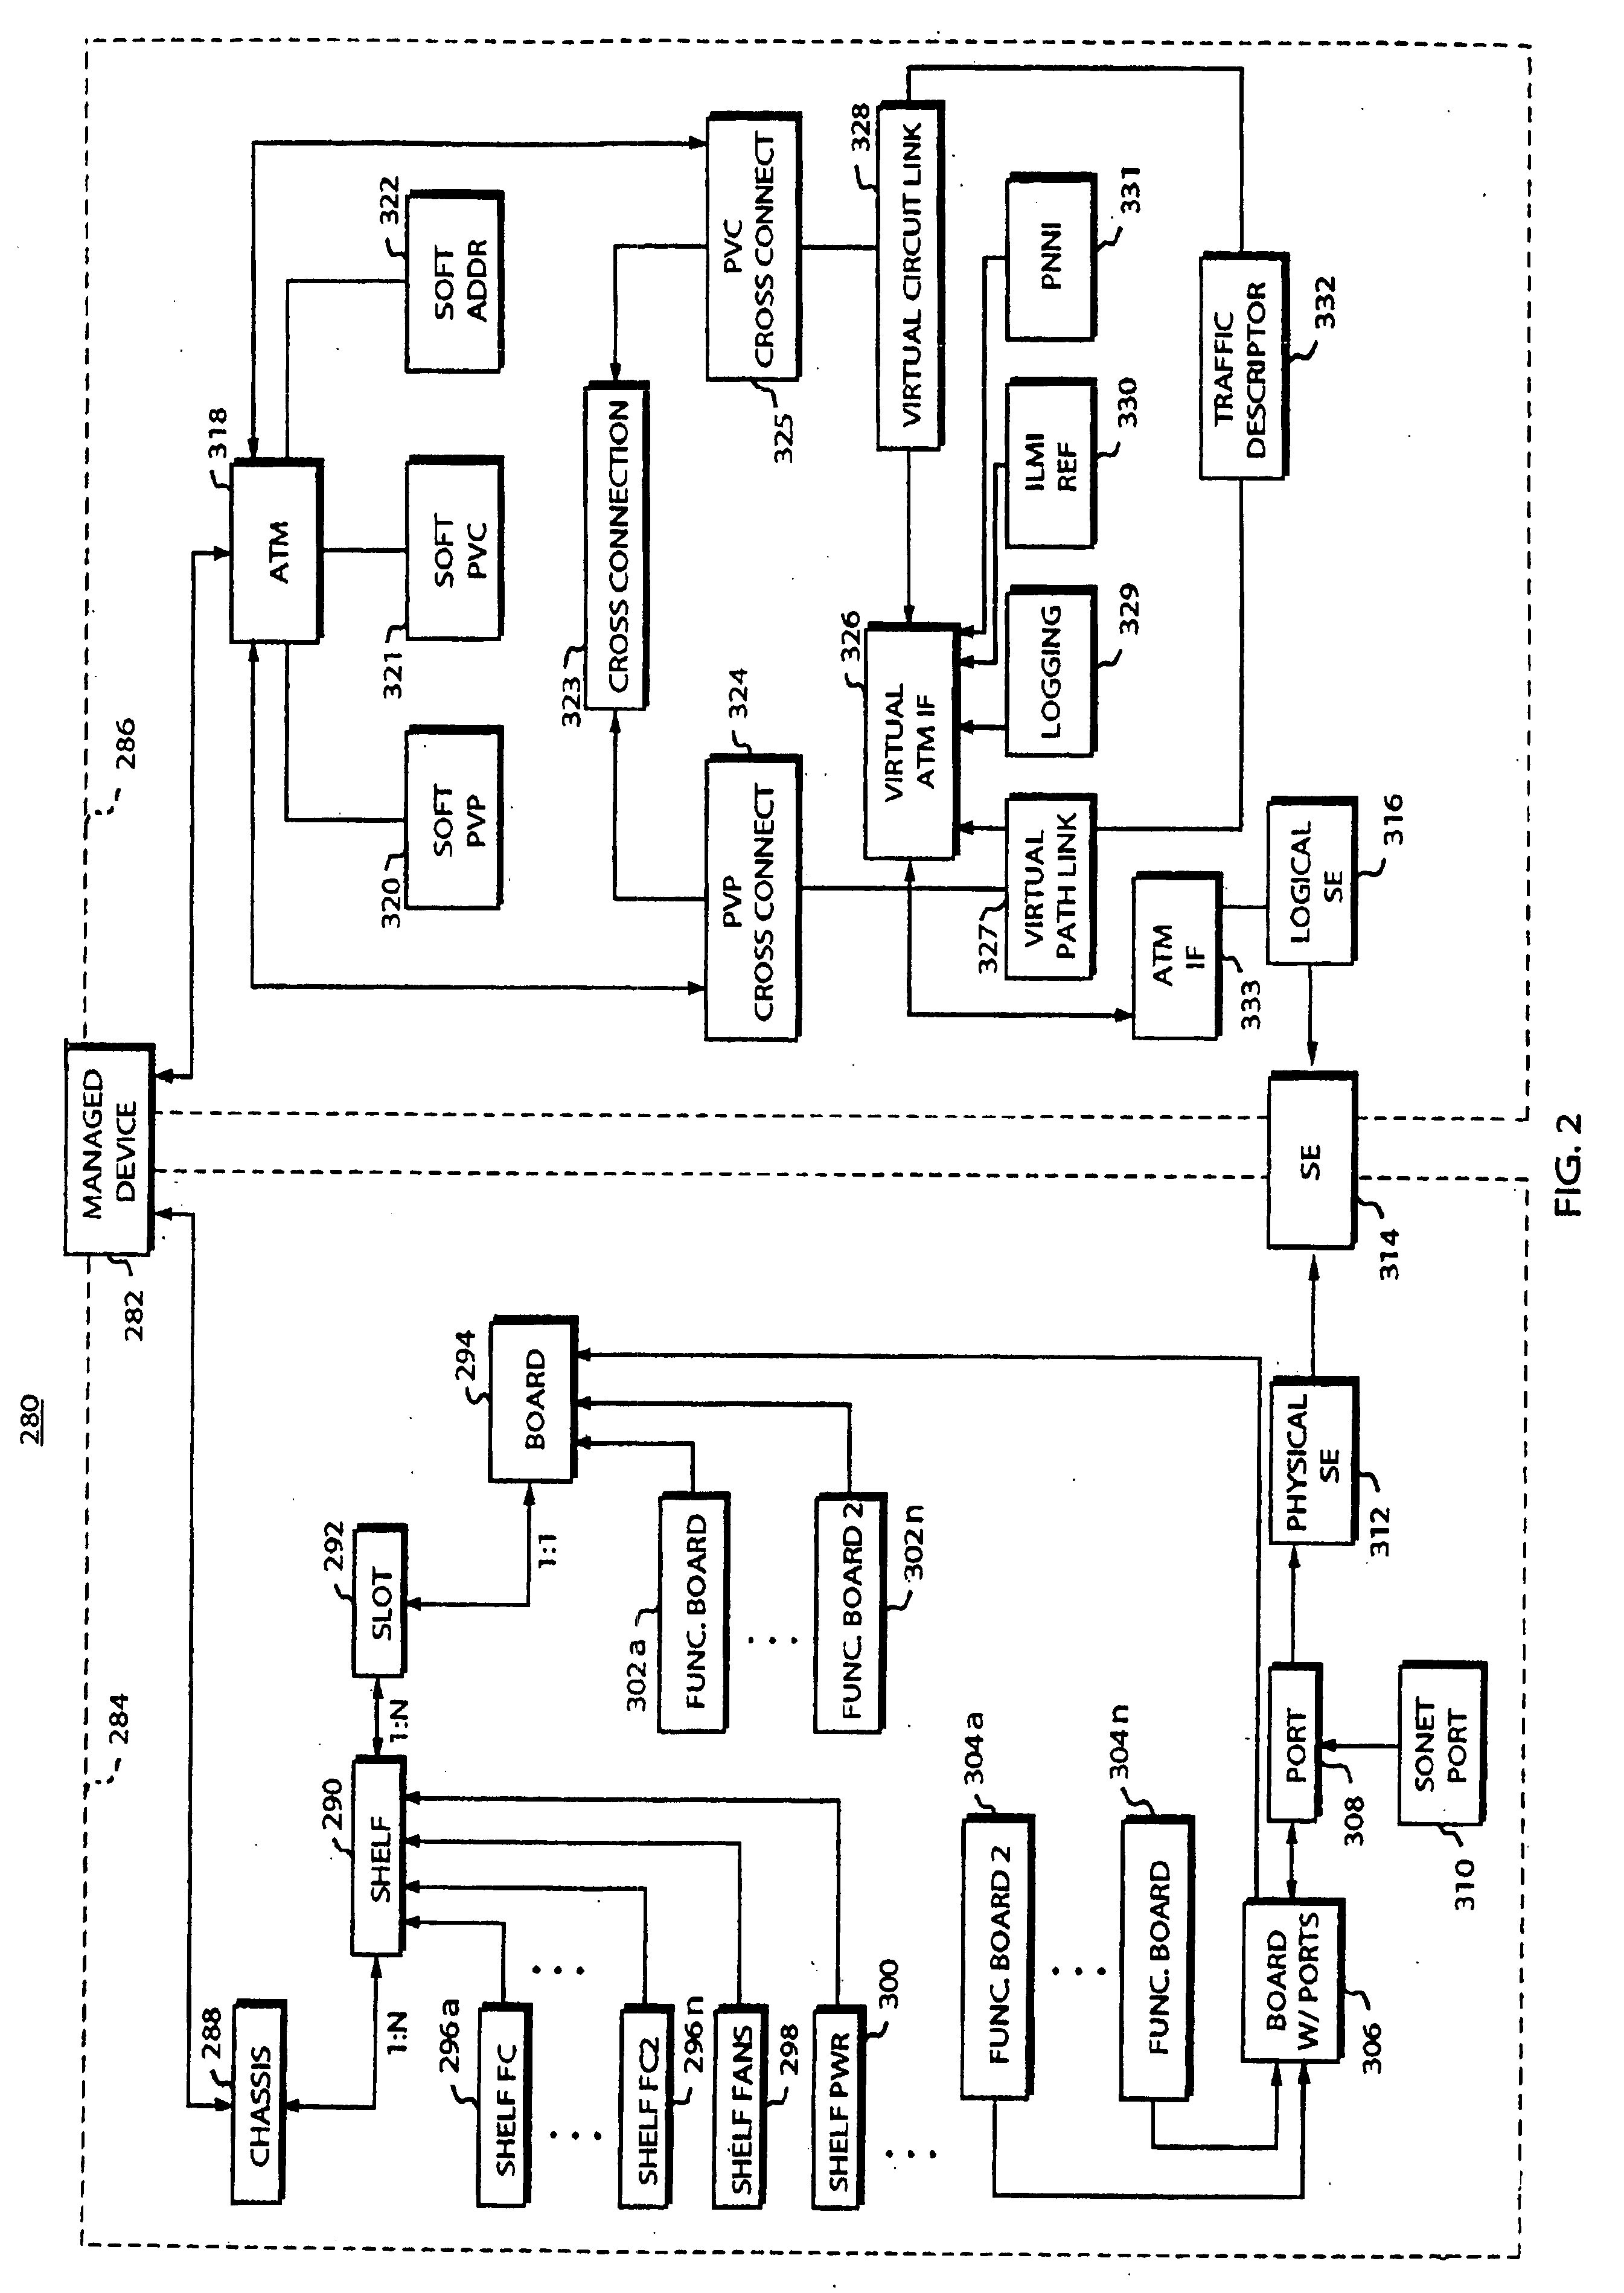 Network device with embedded timing synchronization